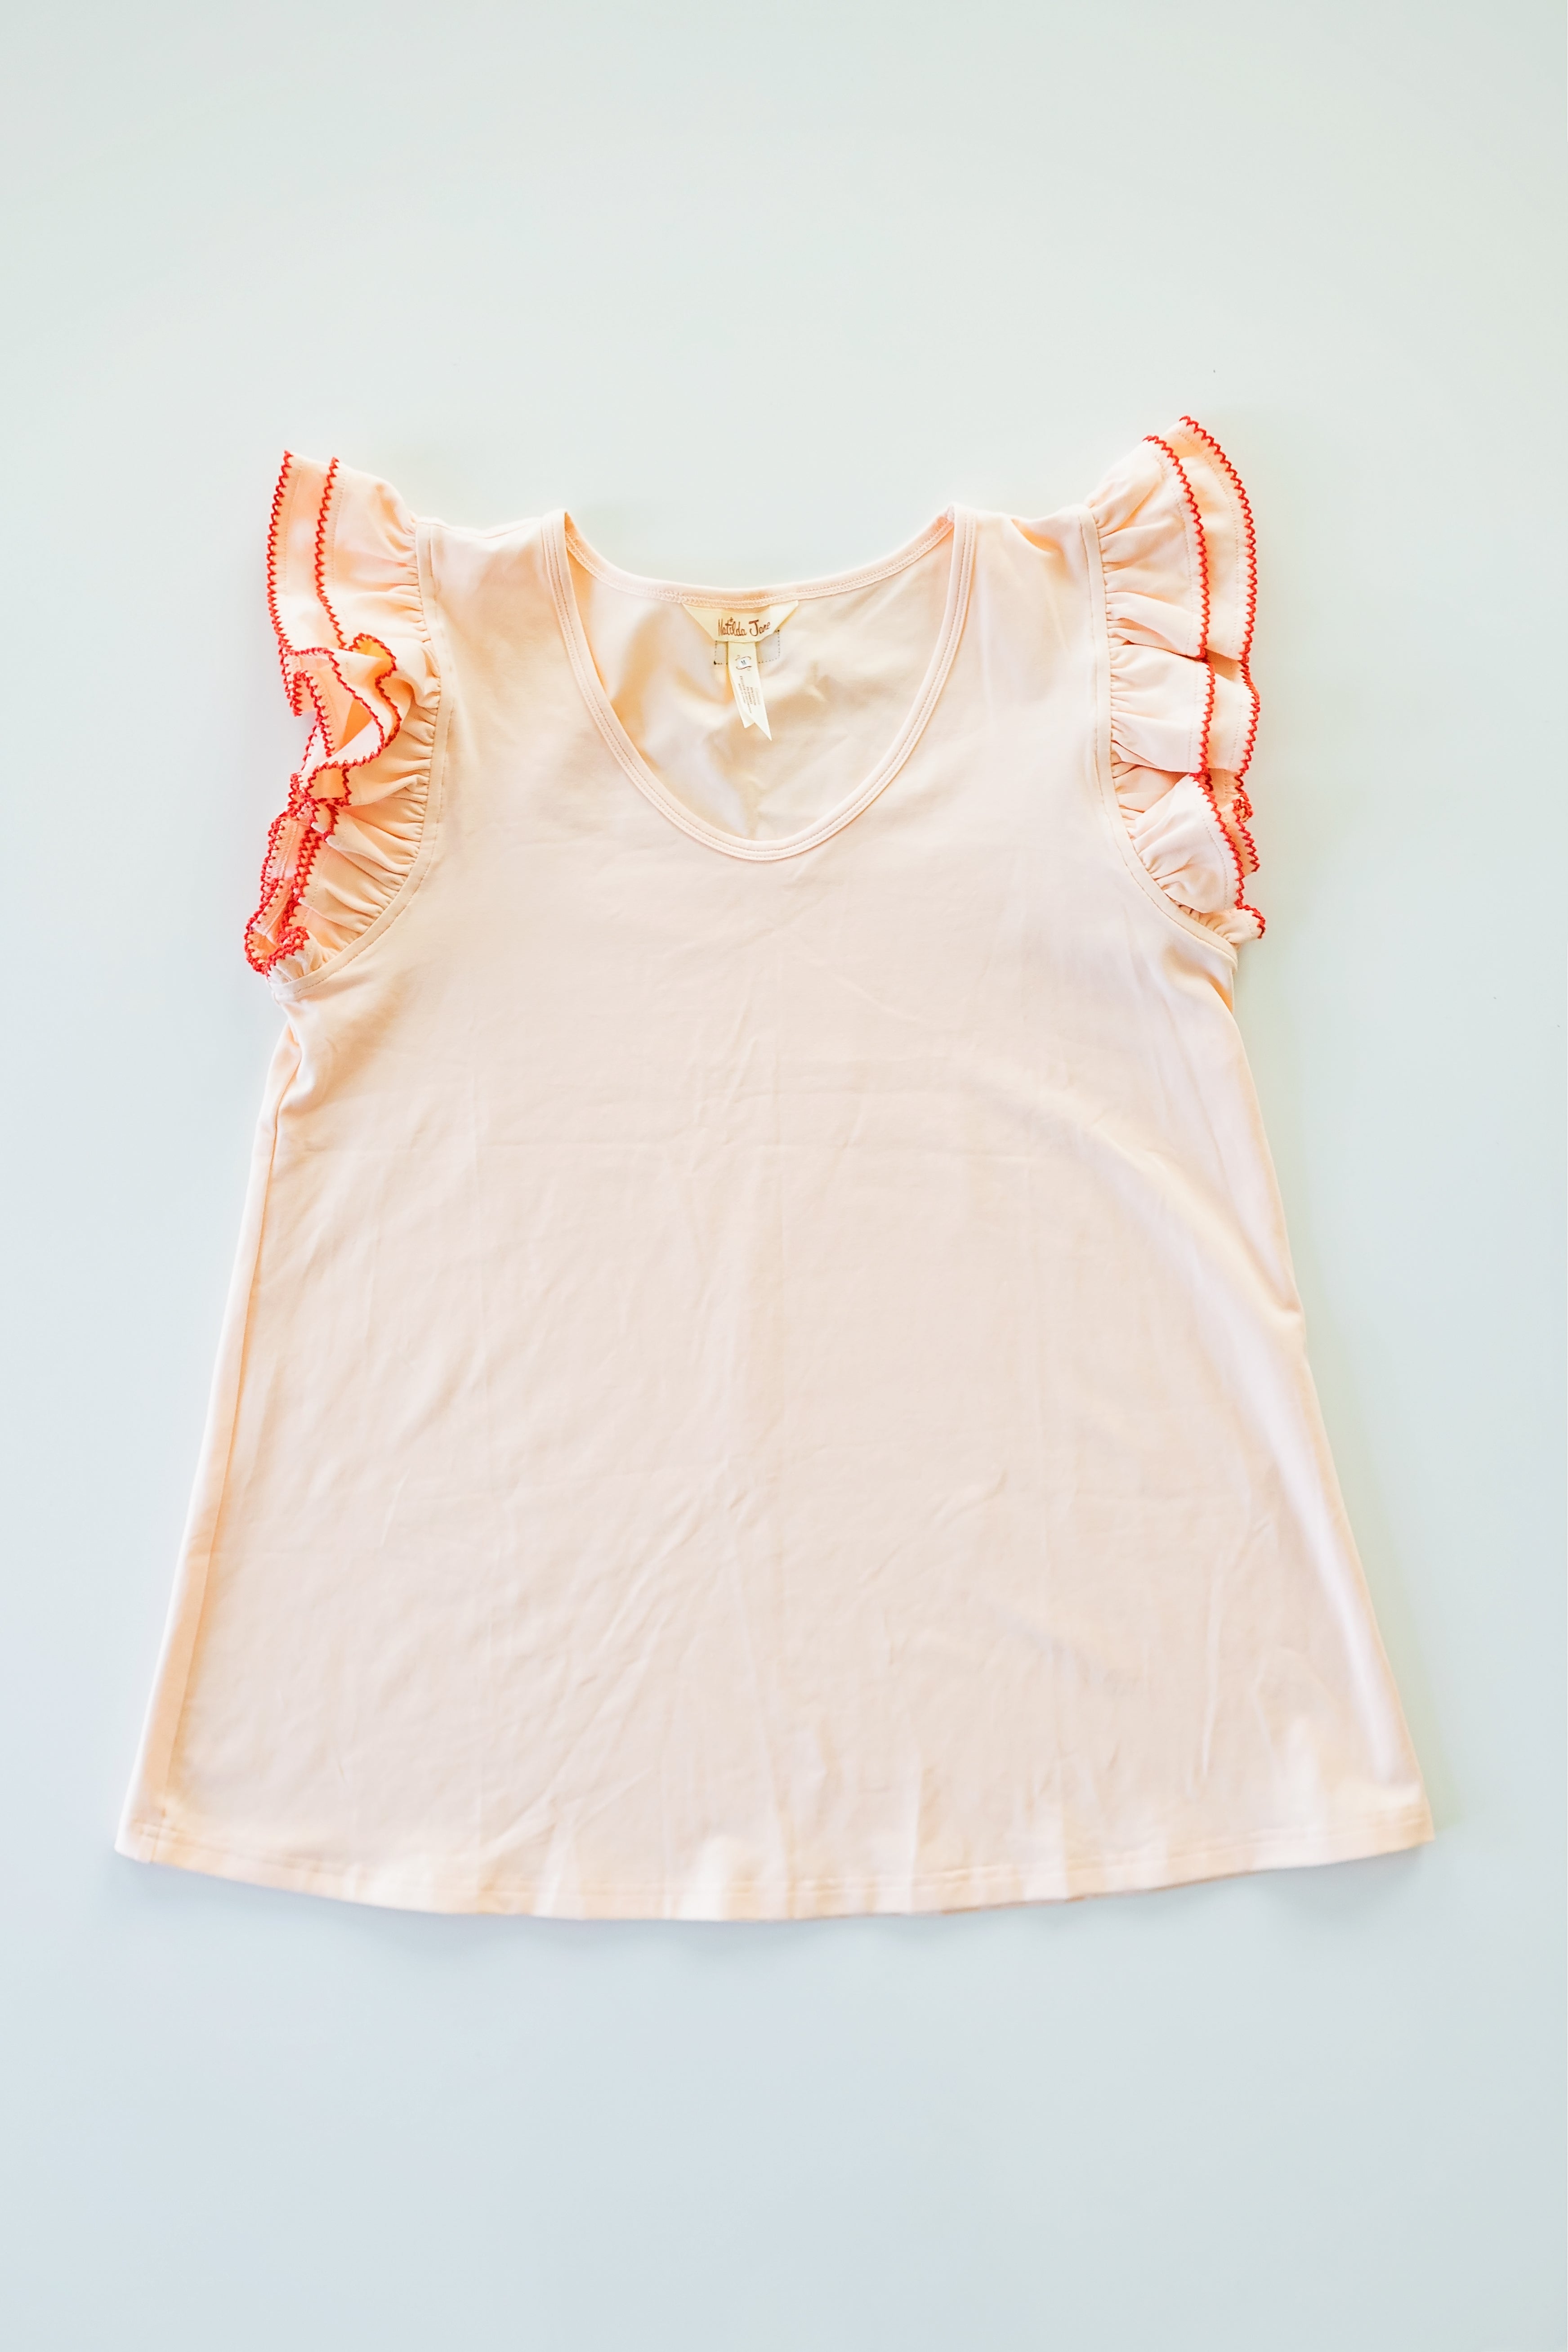 Women's Top | Candlelight